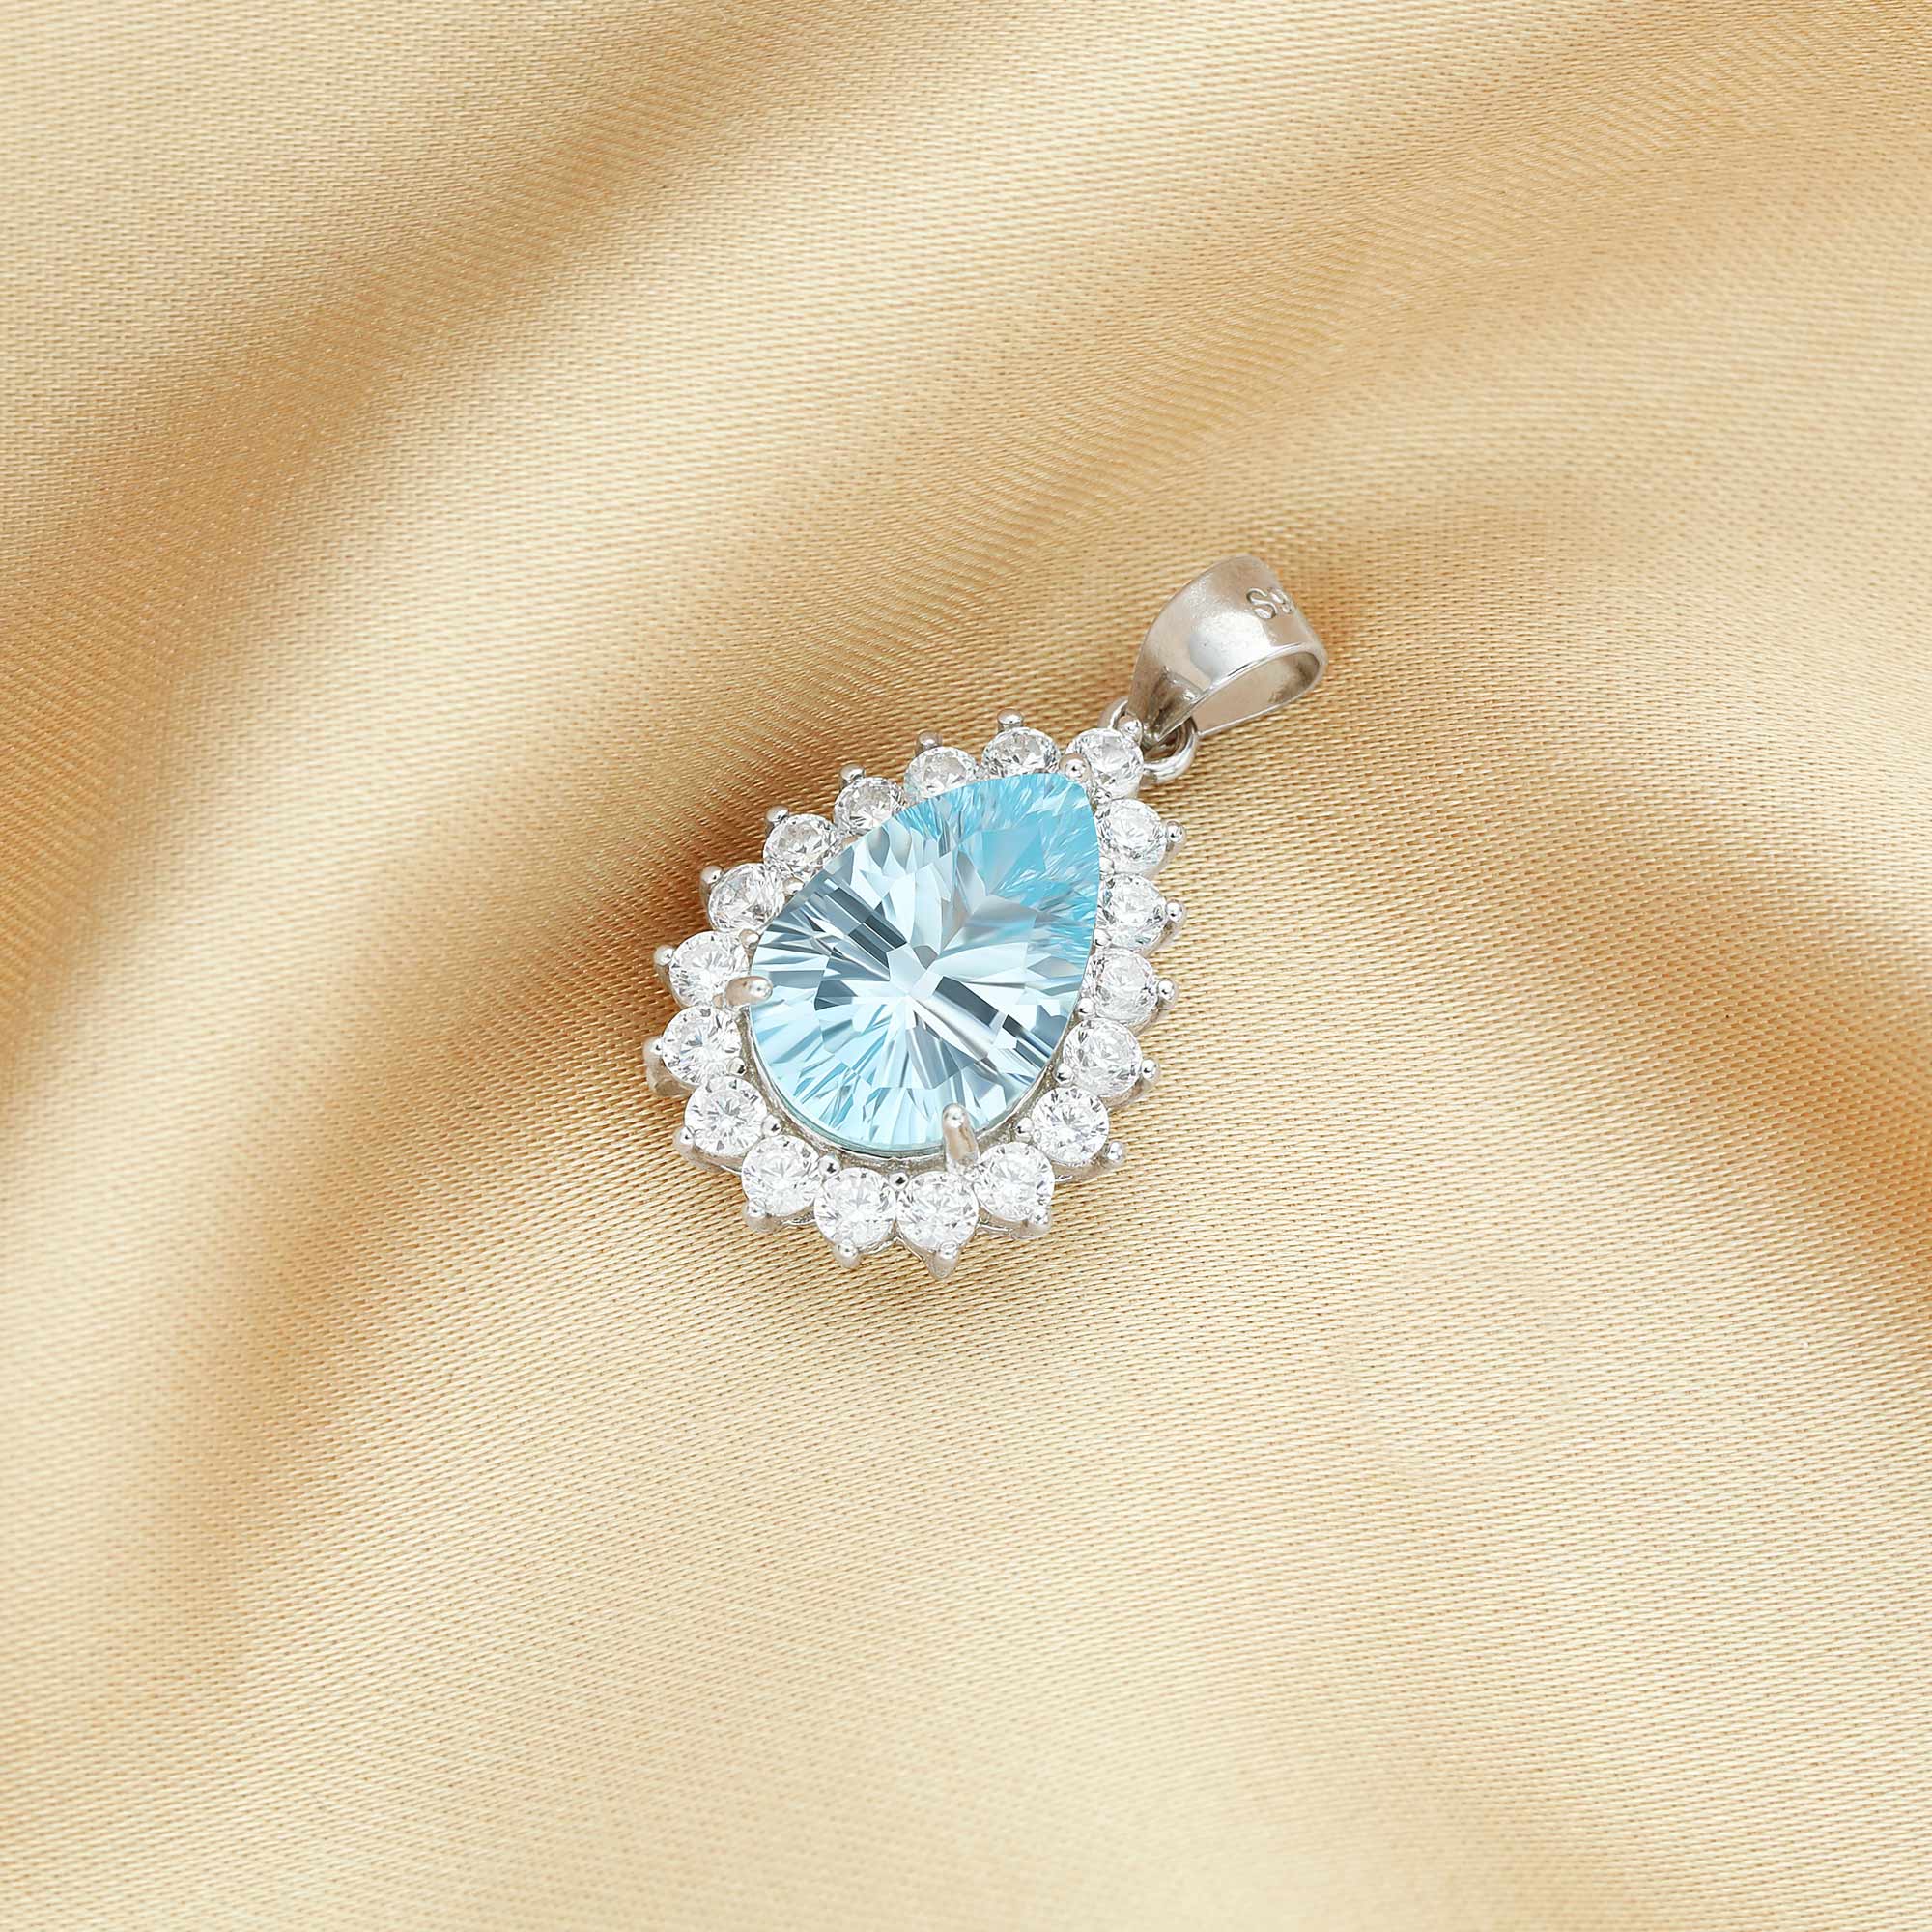 12x17MM Pear Birthstone Pendant Charm With 8x12MM Sky Blue Topaz,Solid 925 Sterling Silver Charm,November Birthstone Pendant 1431145 - Click Image to Close